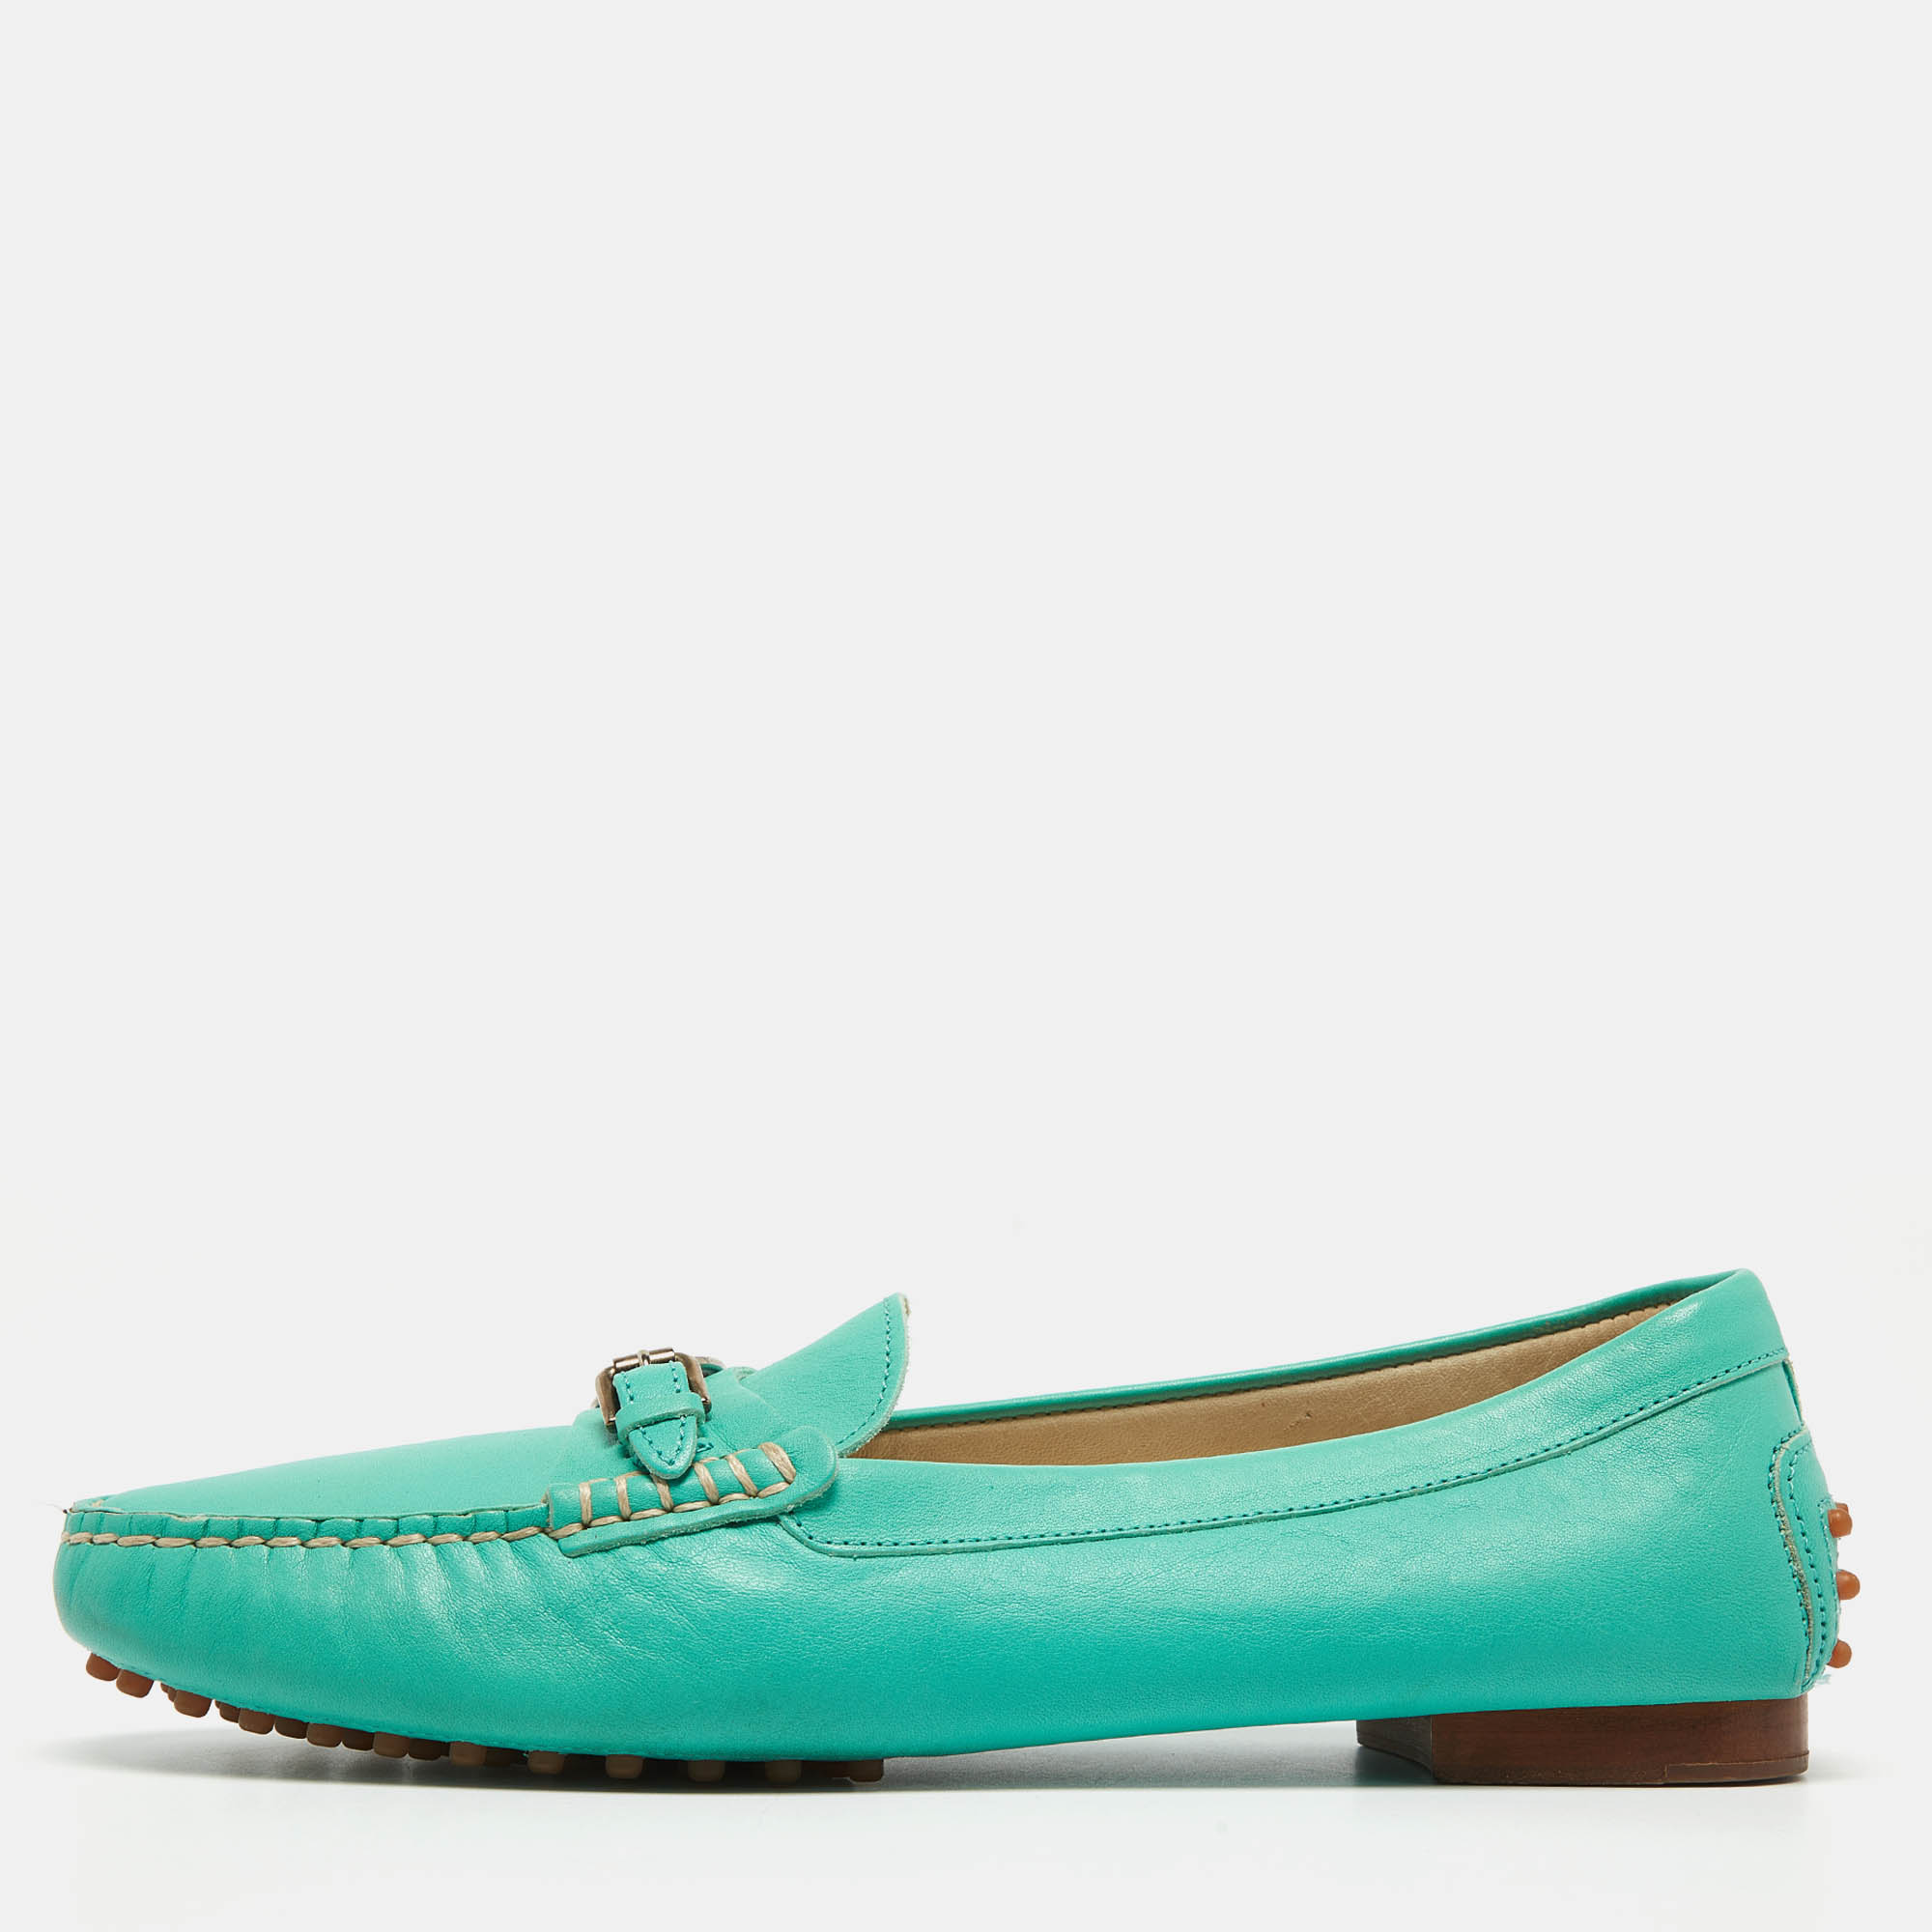 

Ralph Lauren Collection Tiffany Blue Leather Buckle Loafers Size 40, Green